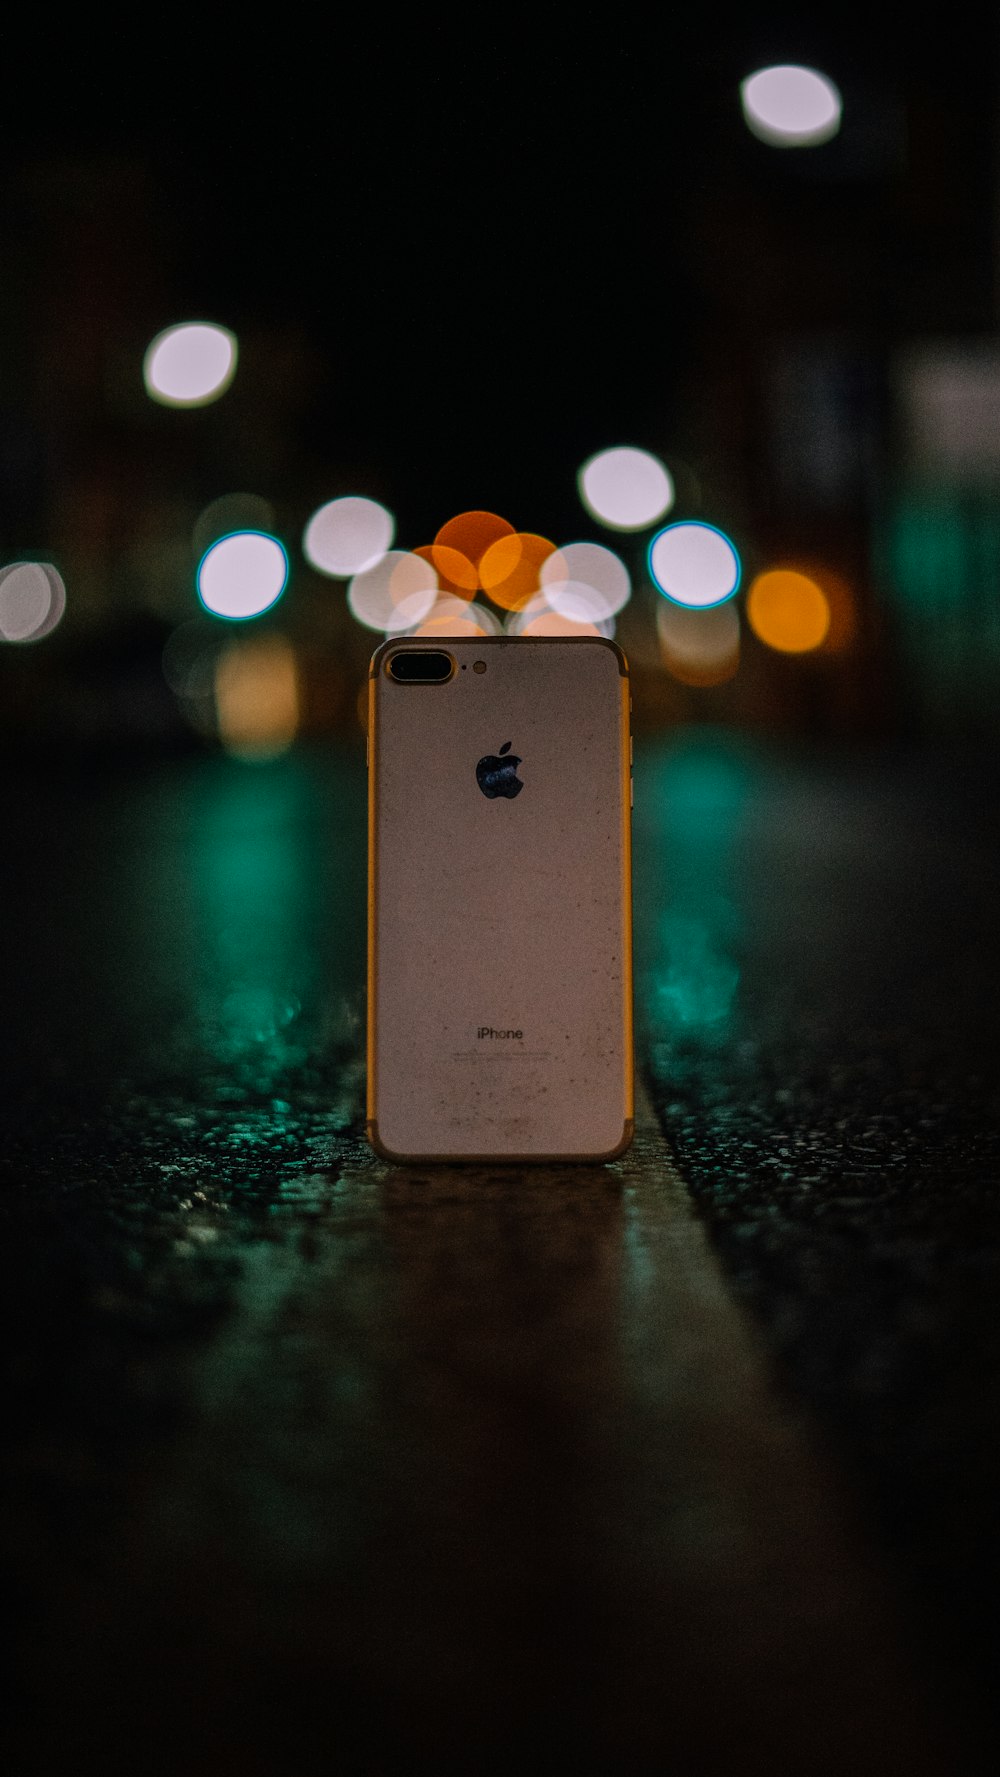 rose gold iPhone 8 Plus standing upright in the middle of the road during night